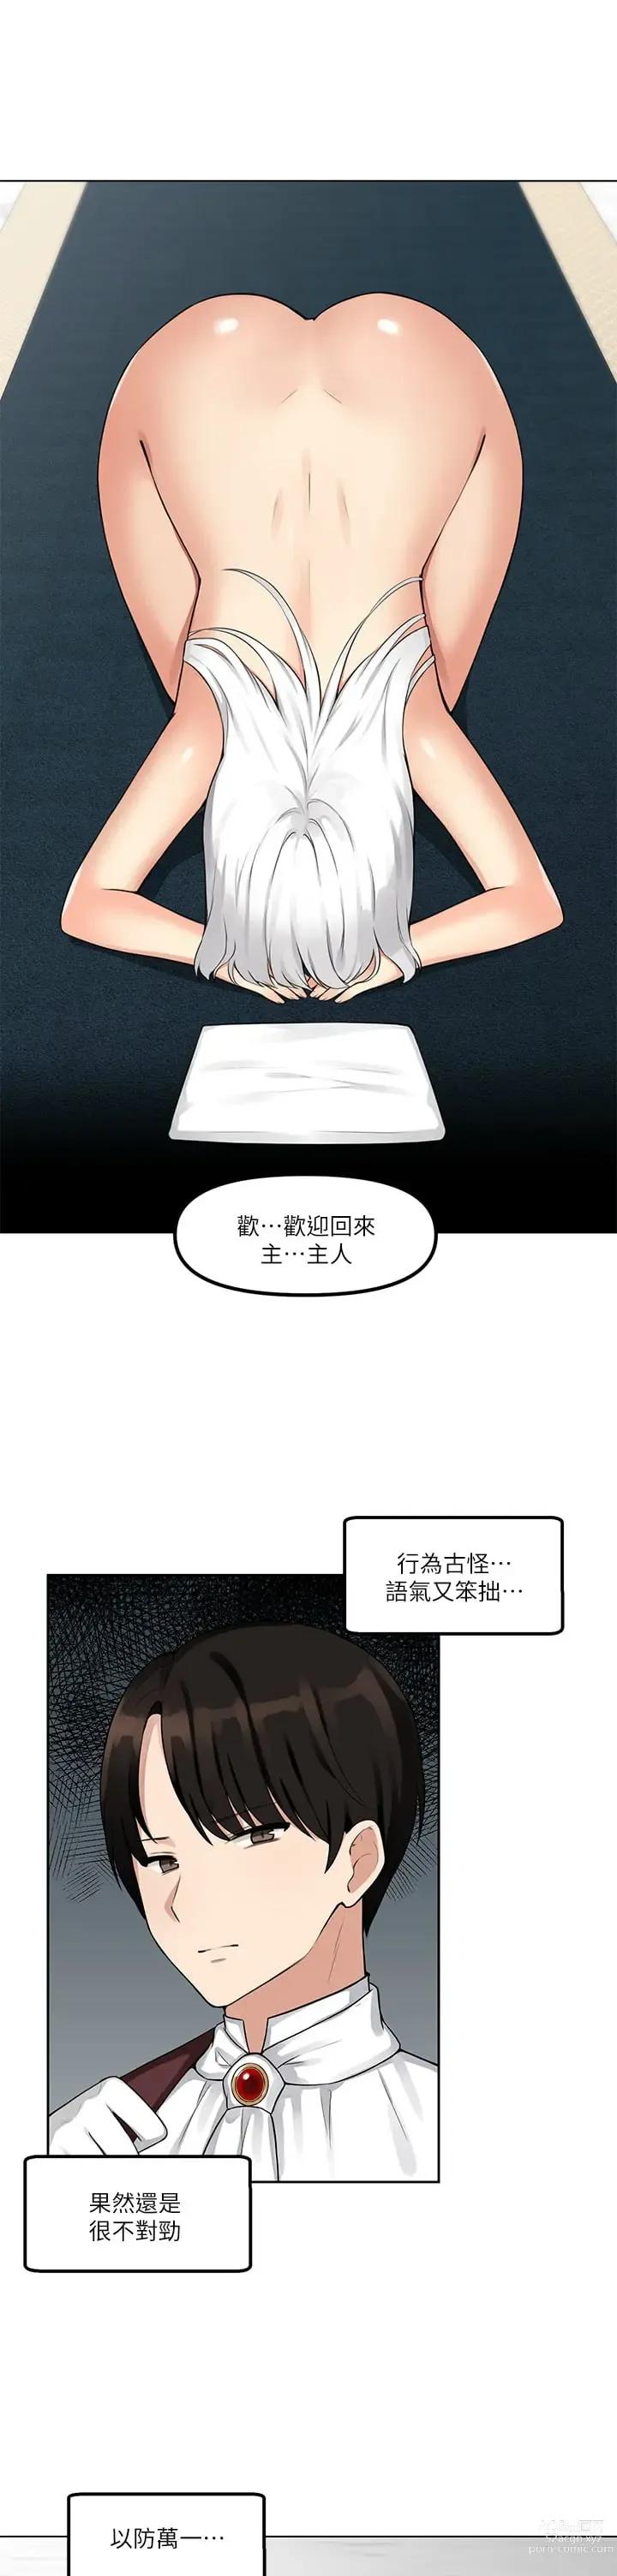 Page 13 of manga 抖M女仆/ Elf Who Likes To Be Humiliated